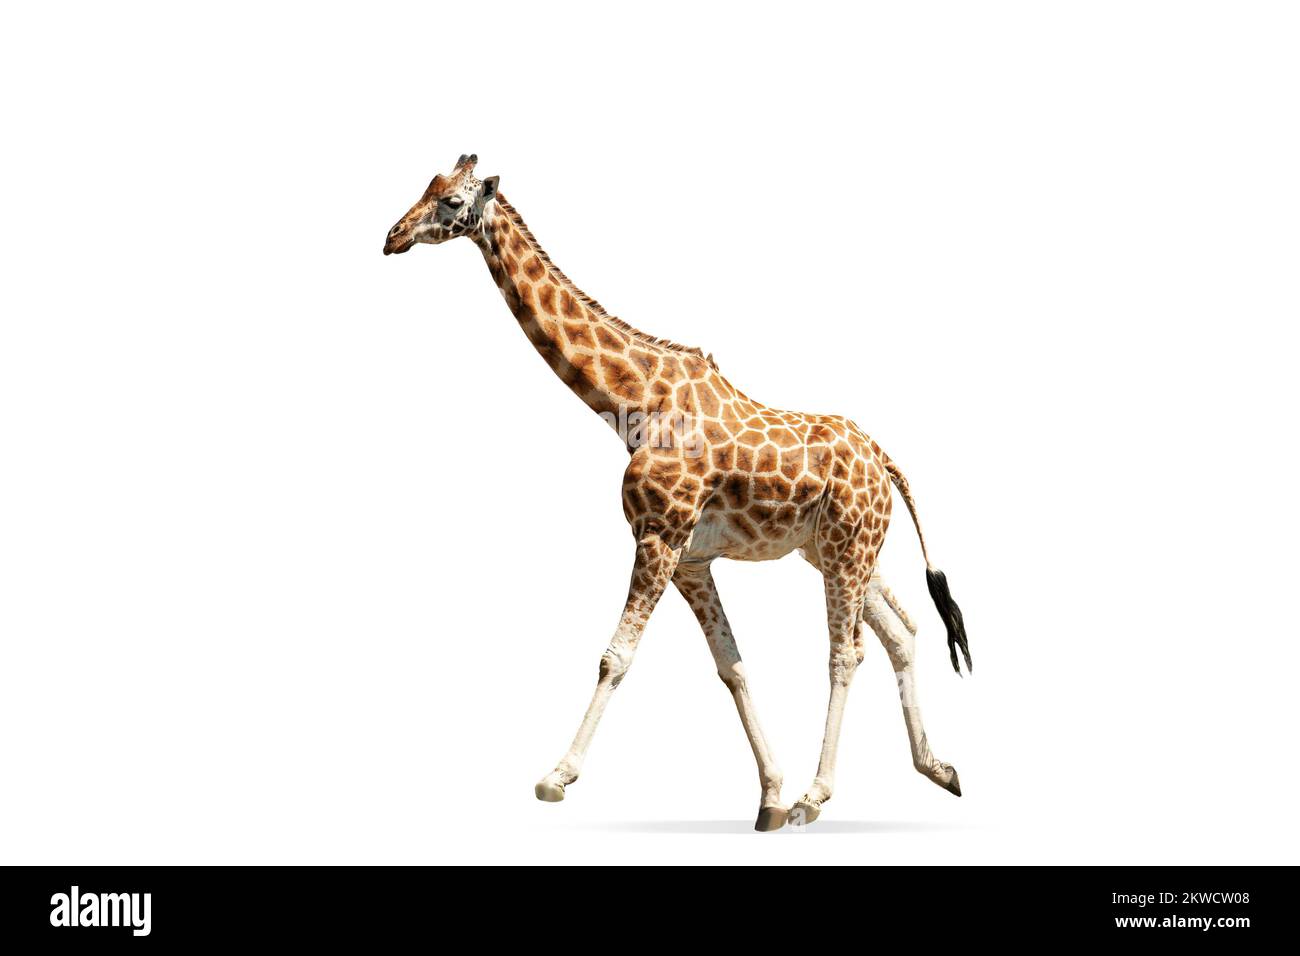 Beautiful giraffe isolated over white background. Side view image. Concept of wildlife protection Stock Photo